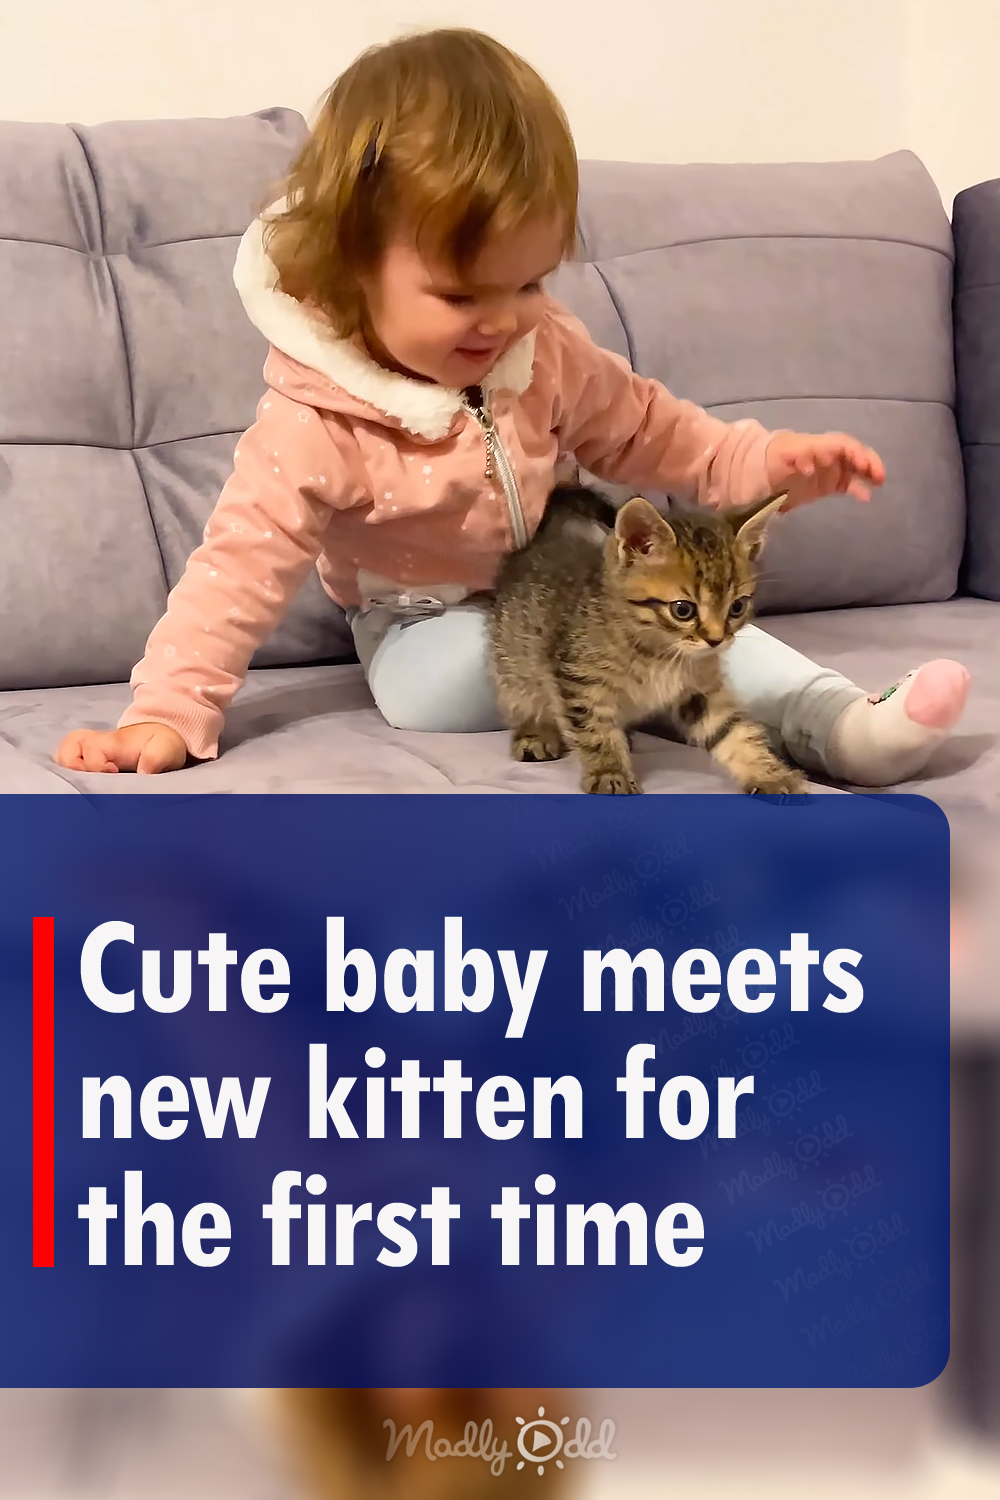 Cute baby meets new kitten for the first time